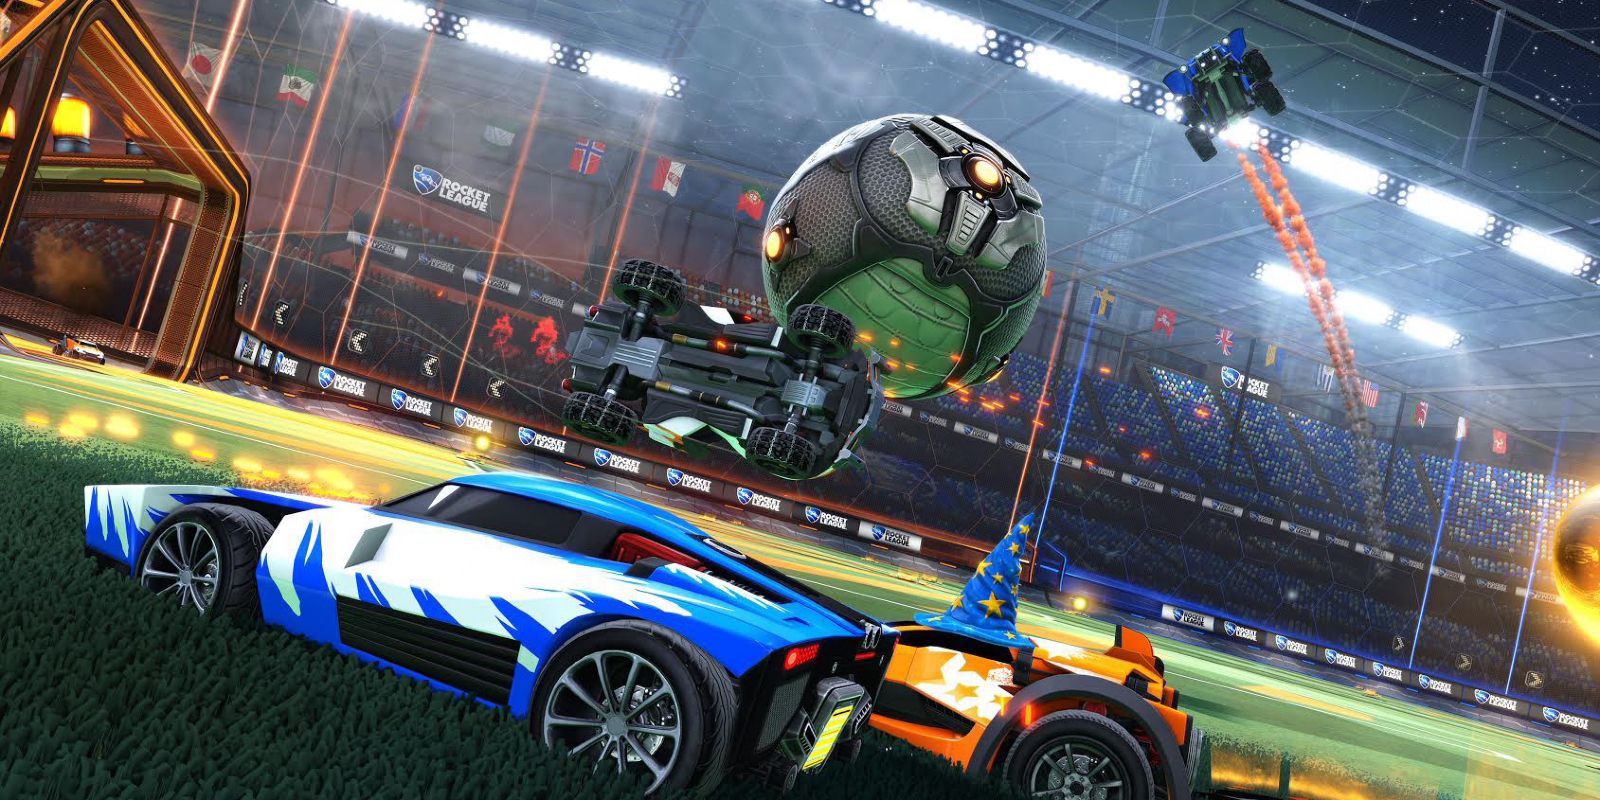 A car flips in mid-air as other cars race in Rocket League.